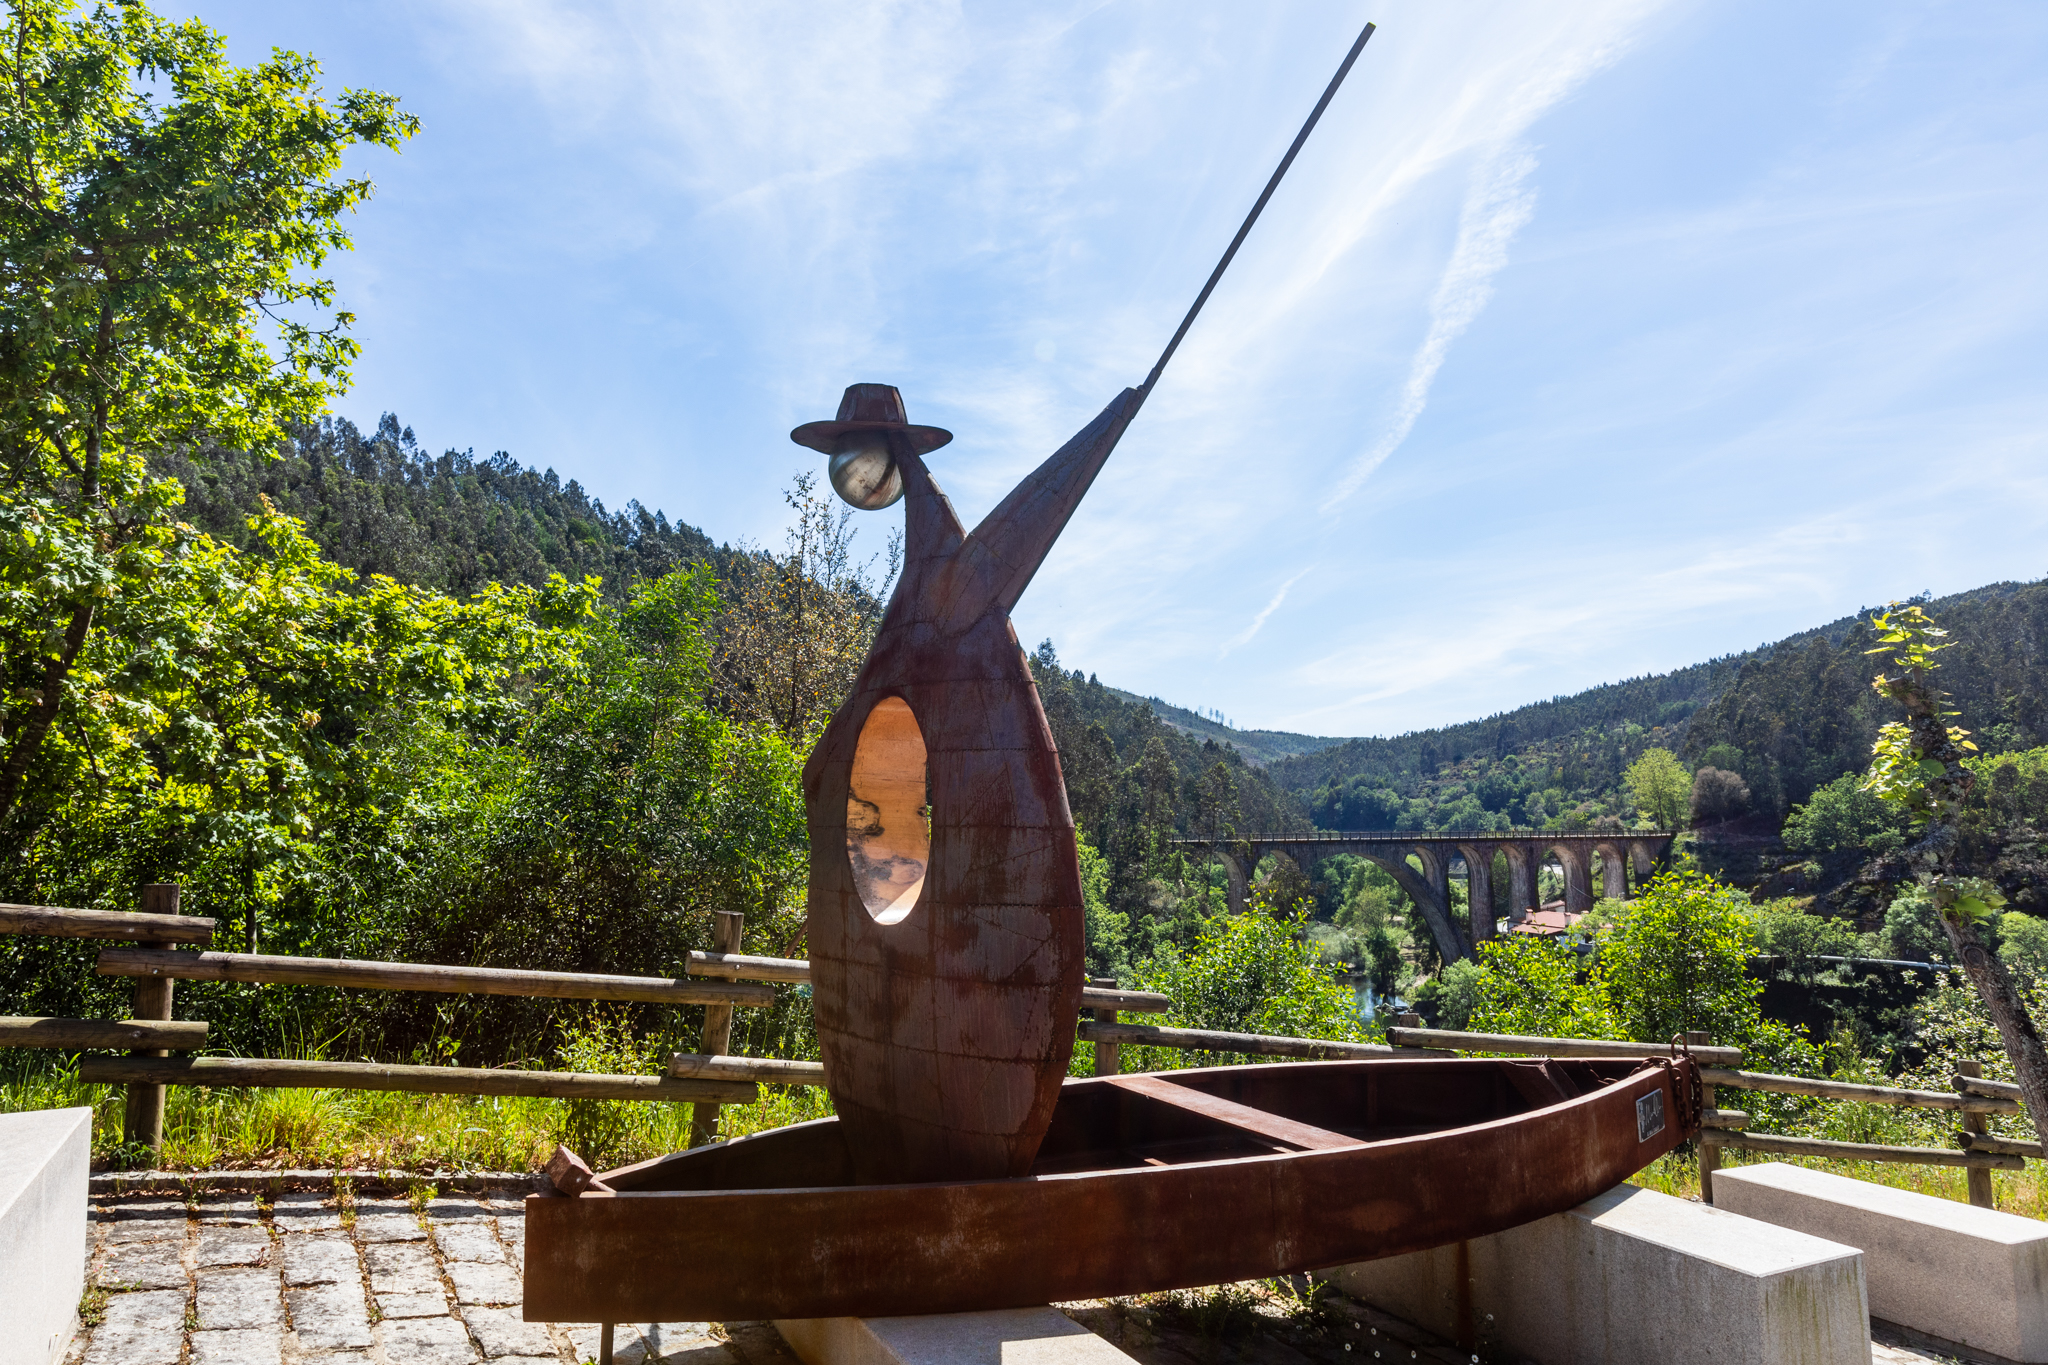 Art installation - Homage to the Vouga River Boatman